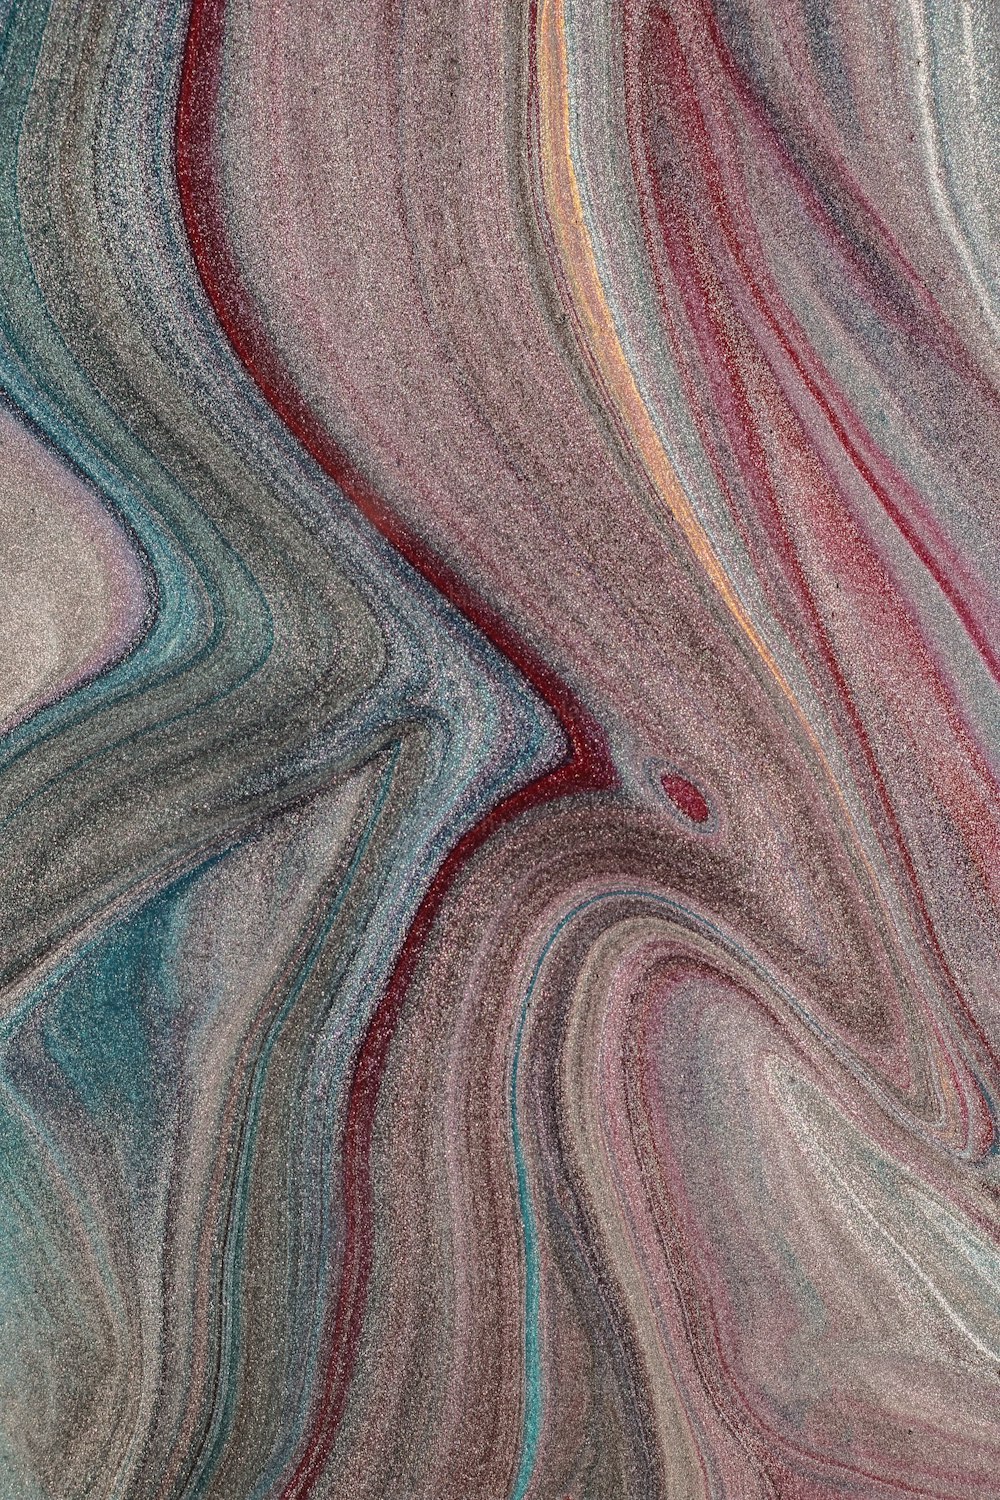 an abstract painting of multicolored lines